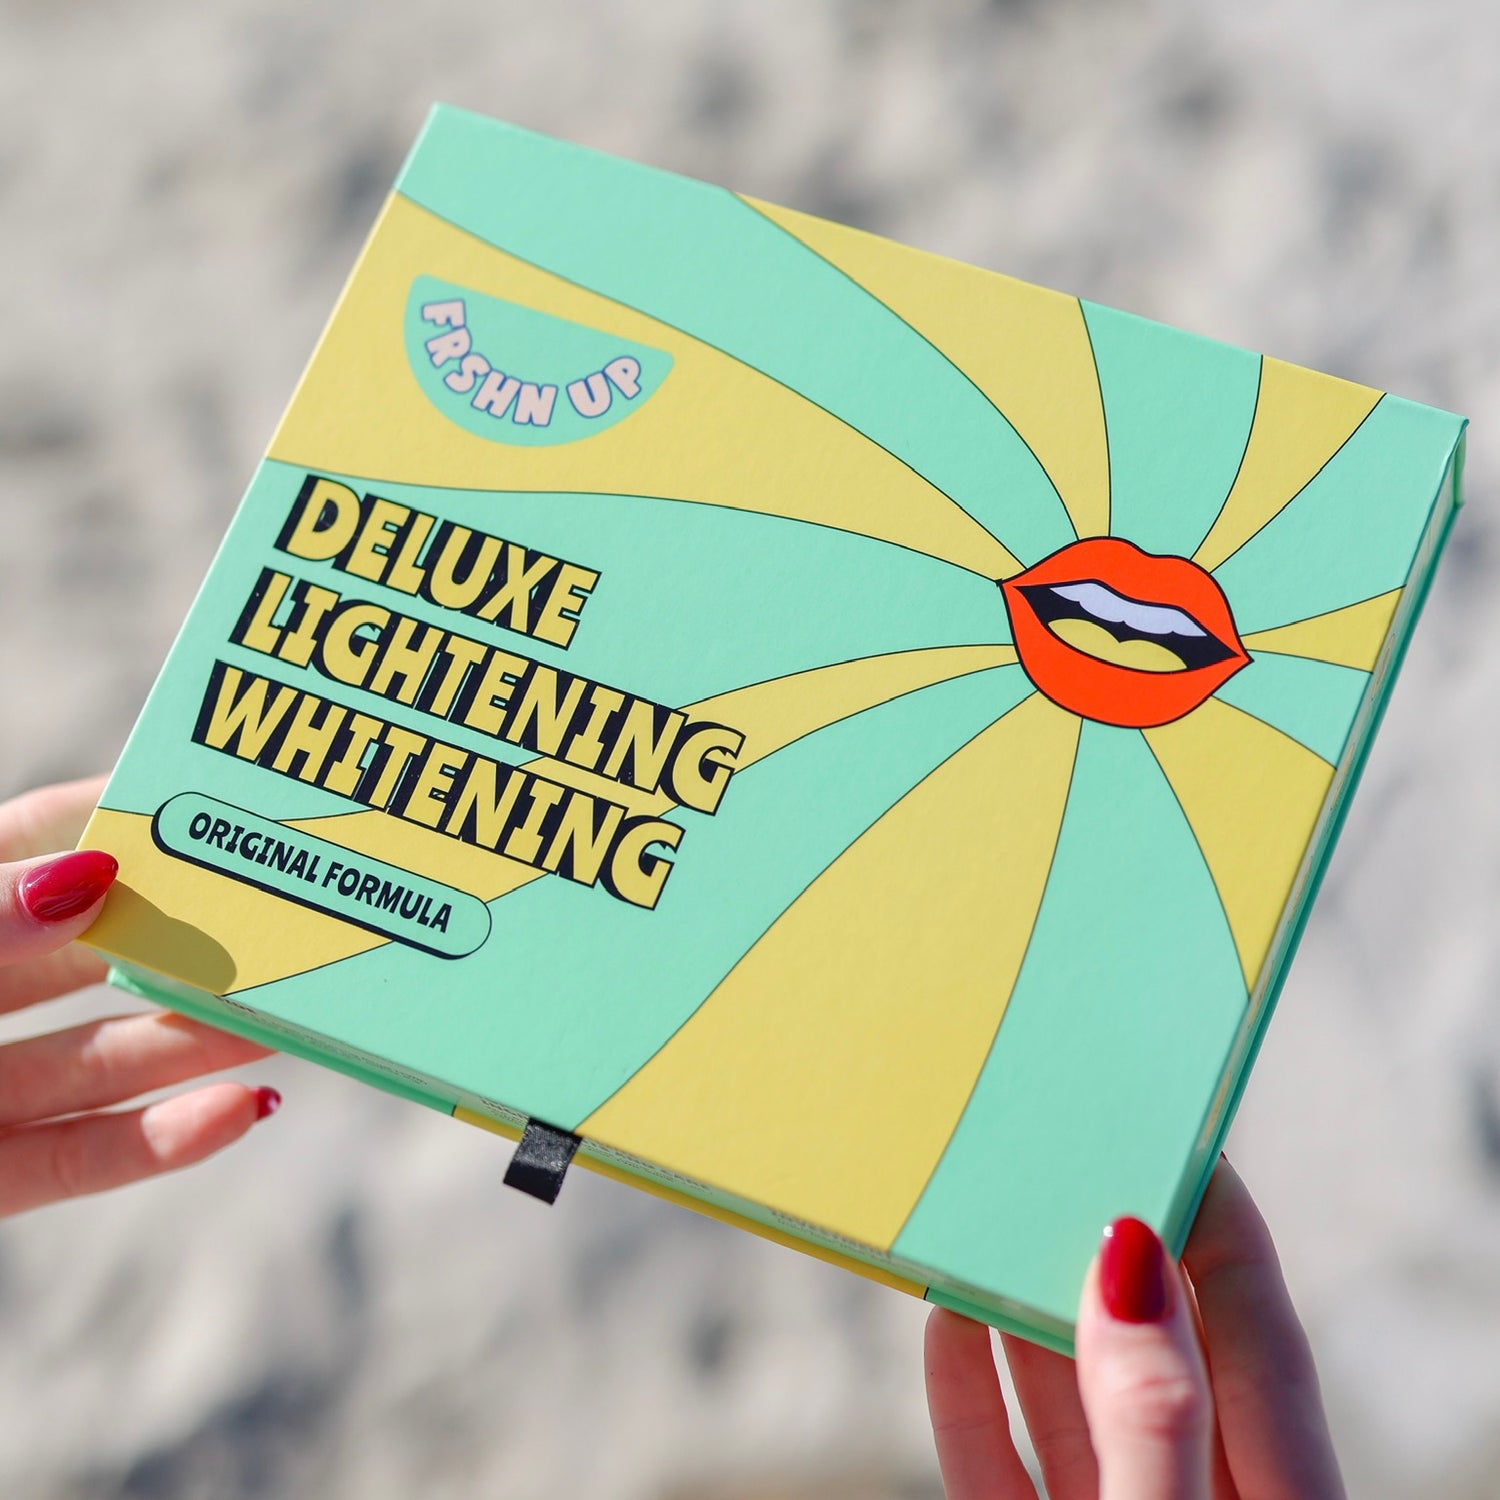 A person holds a green and yellow box labeled "Deluxe Lightening Whitening Kit" with a graphic of lips and the words "FRSHN UP" and "Original Formula" highlighting its teeth whitening power using pro-grade ingredients.